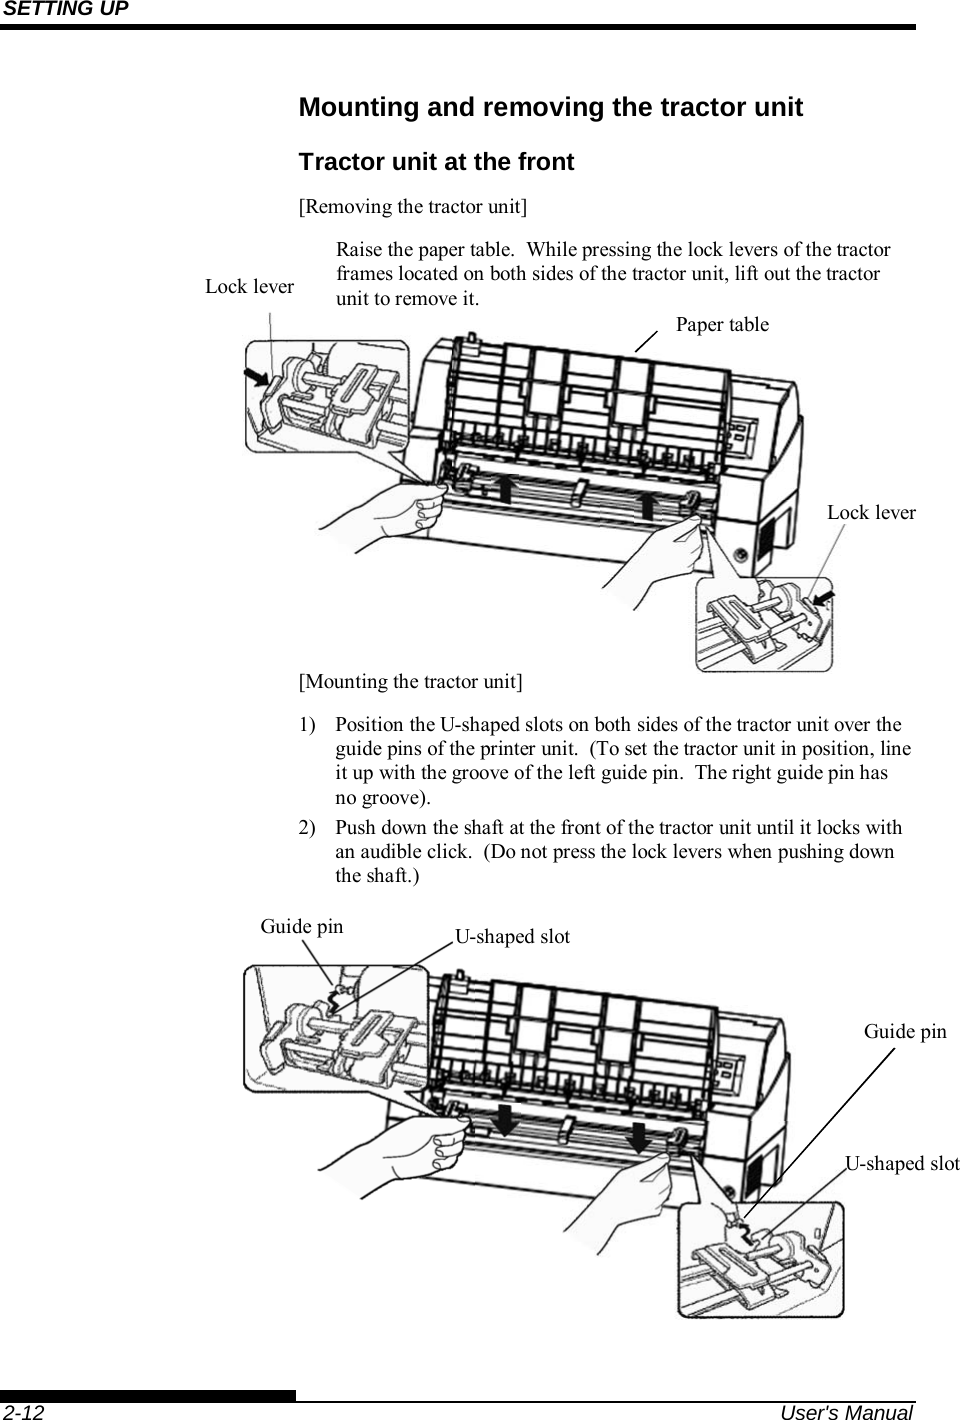 SETTING UP    2-12  User&apos;s Manual Mounting and removing the tractor unit Tractor unit at the front [Removing the tractor unit] Raise the paper table.  While pressing the lock levers of the tractor frames located on both sides of the tractor unit, lift out the tractor unit to remove it.         [Mounting the tractor unit] 1)  Position the U-shaped slots on both sides of the tractor unit over the guide pins of the printer unit.  (To set the tractor unit in position, line it up with the groove of the left guide pin.  The right guide pin has no groove). 2)  Push down the shaft at the front of the tractor unit until it locks with an audible click.  (Do not press the lock levers when pushing down the shaft.)    Lock lever Lock lever Paper table Guide pin U-shaped slotU-shaped slotGuide pin 